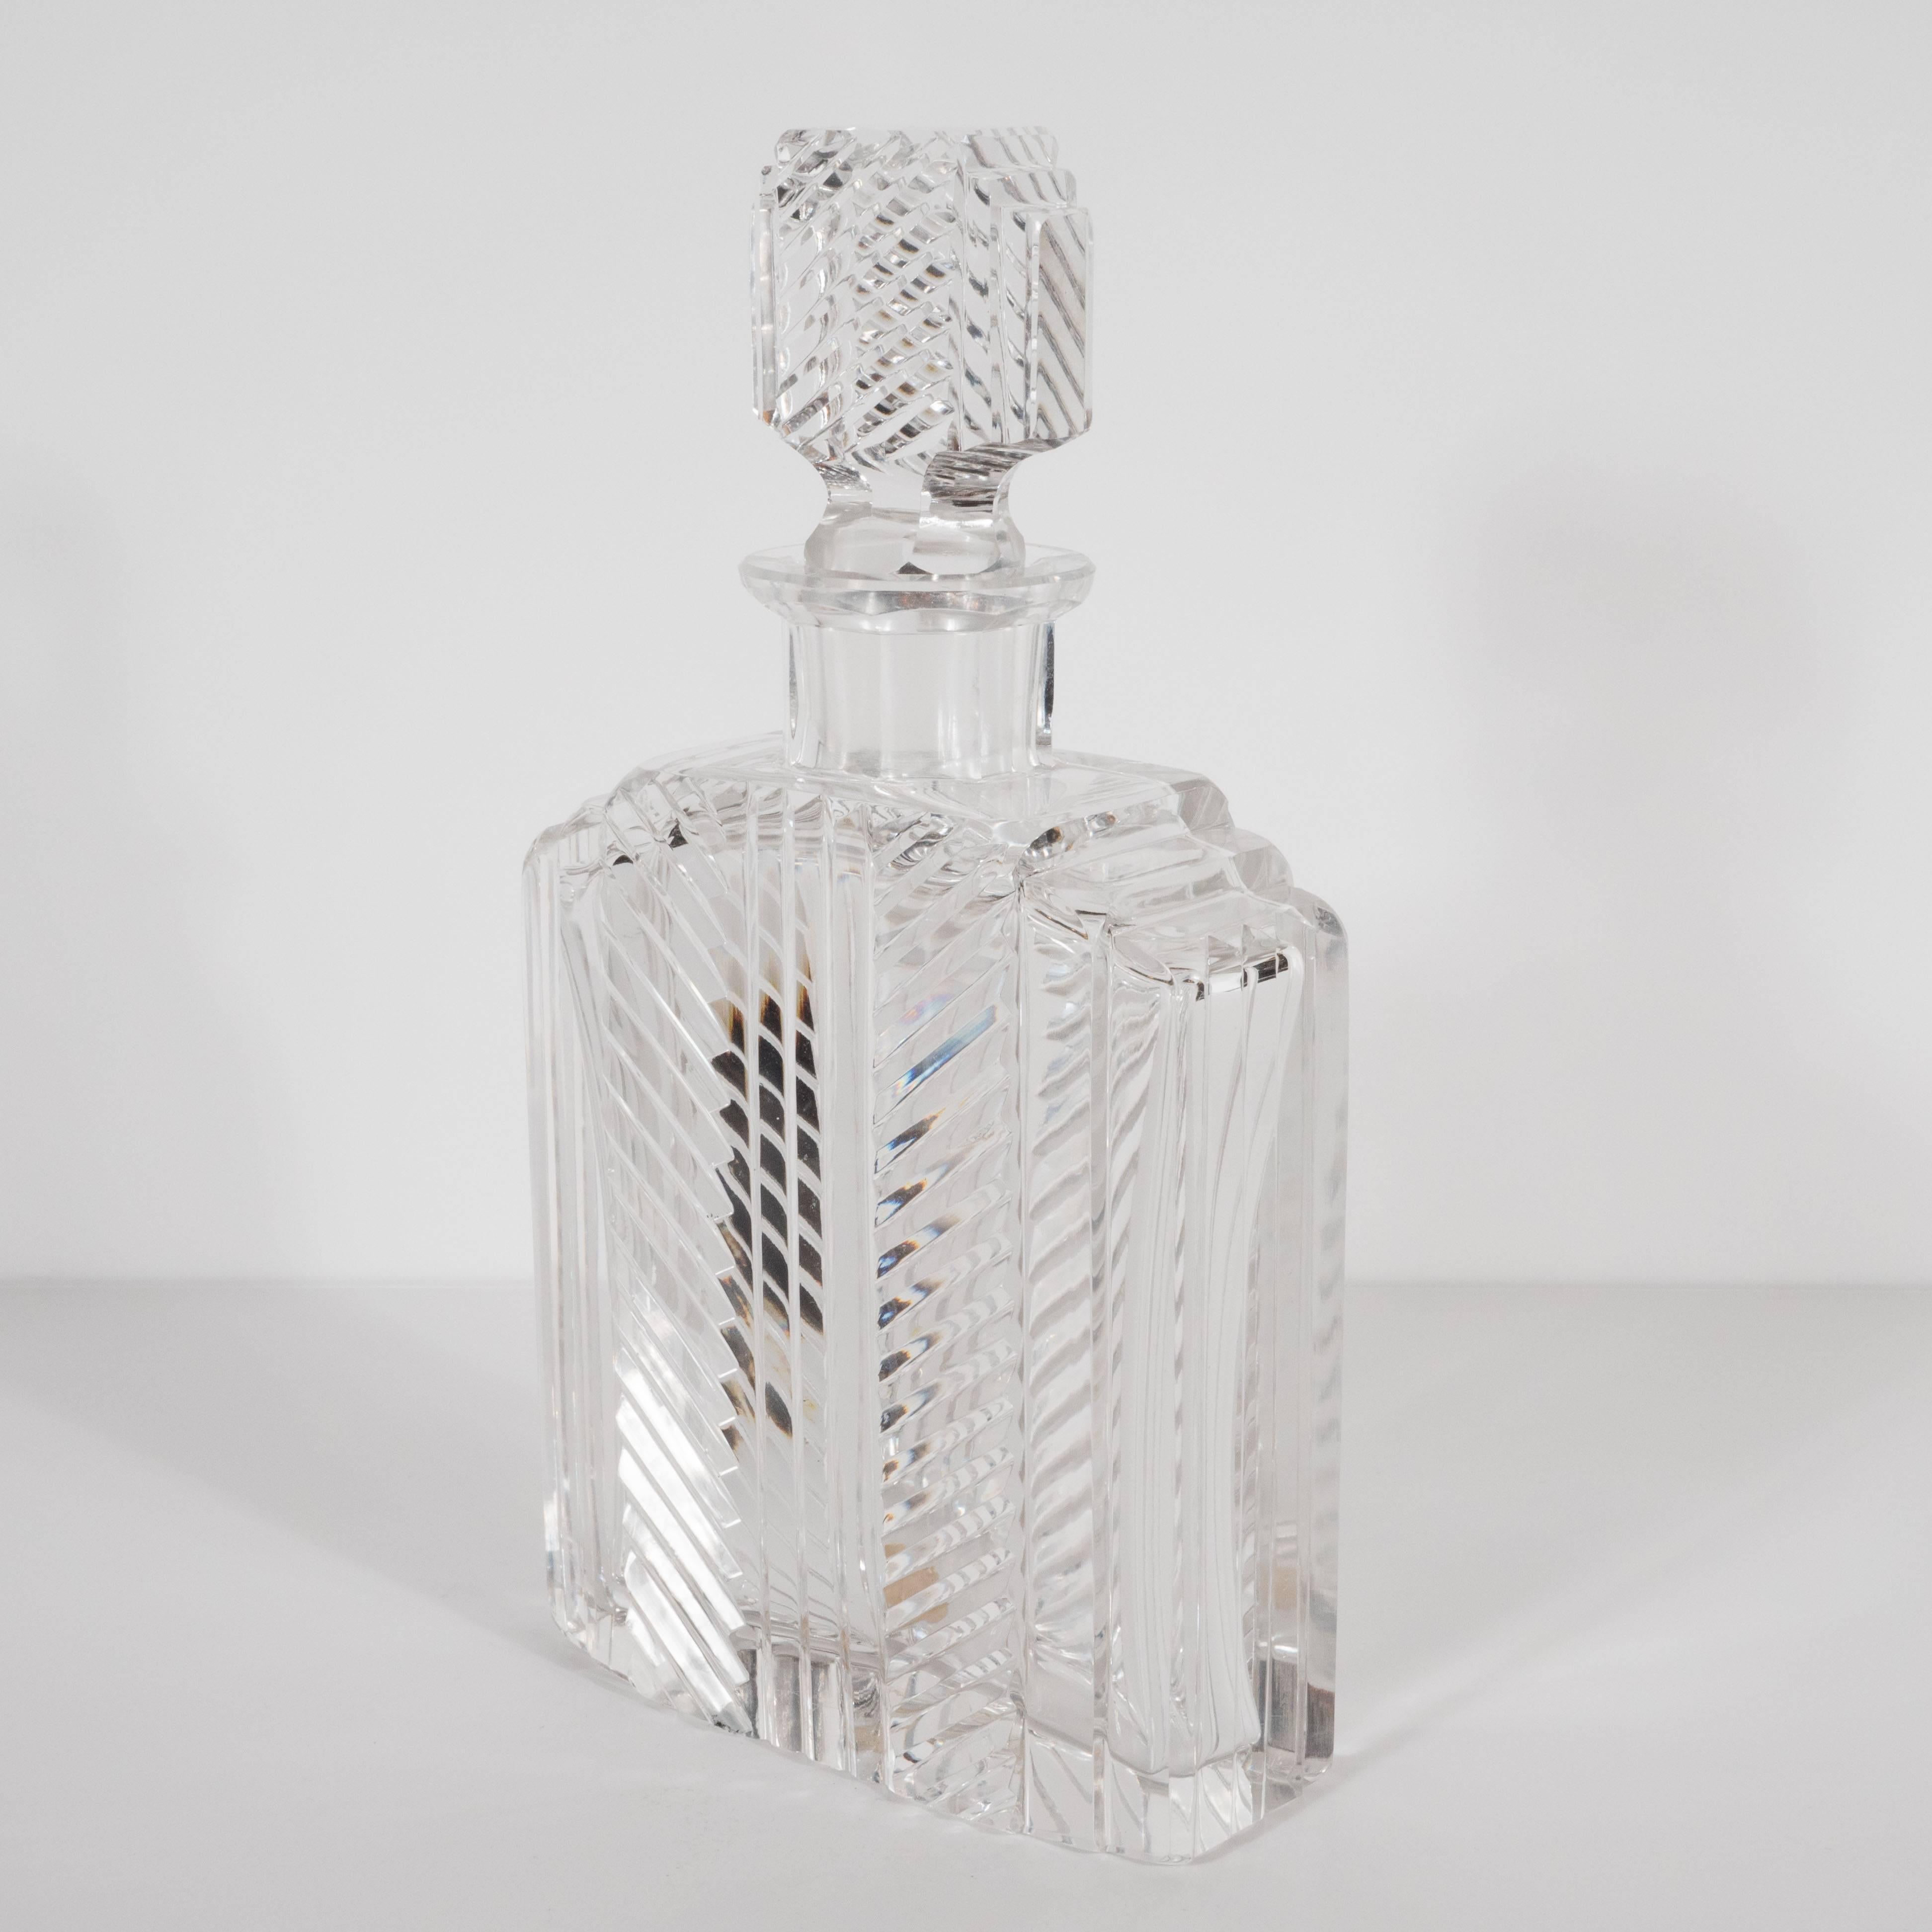 Austrian Exquisite Skyscraper Style Crystal Art Deco Hand-Cut & Beveled Crystal Decanter